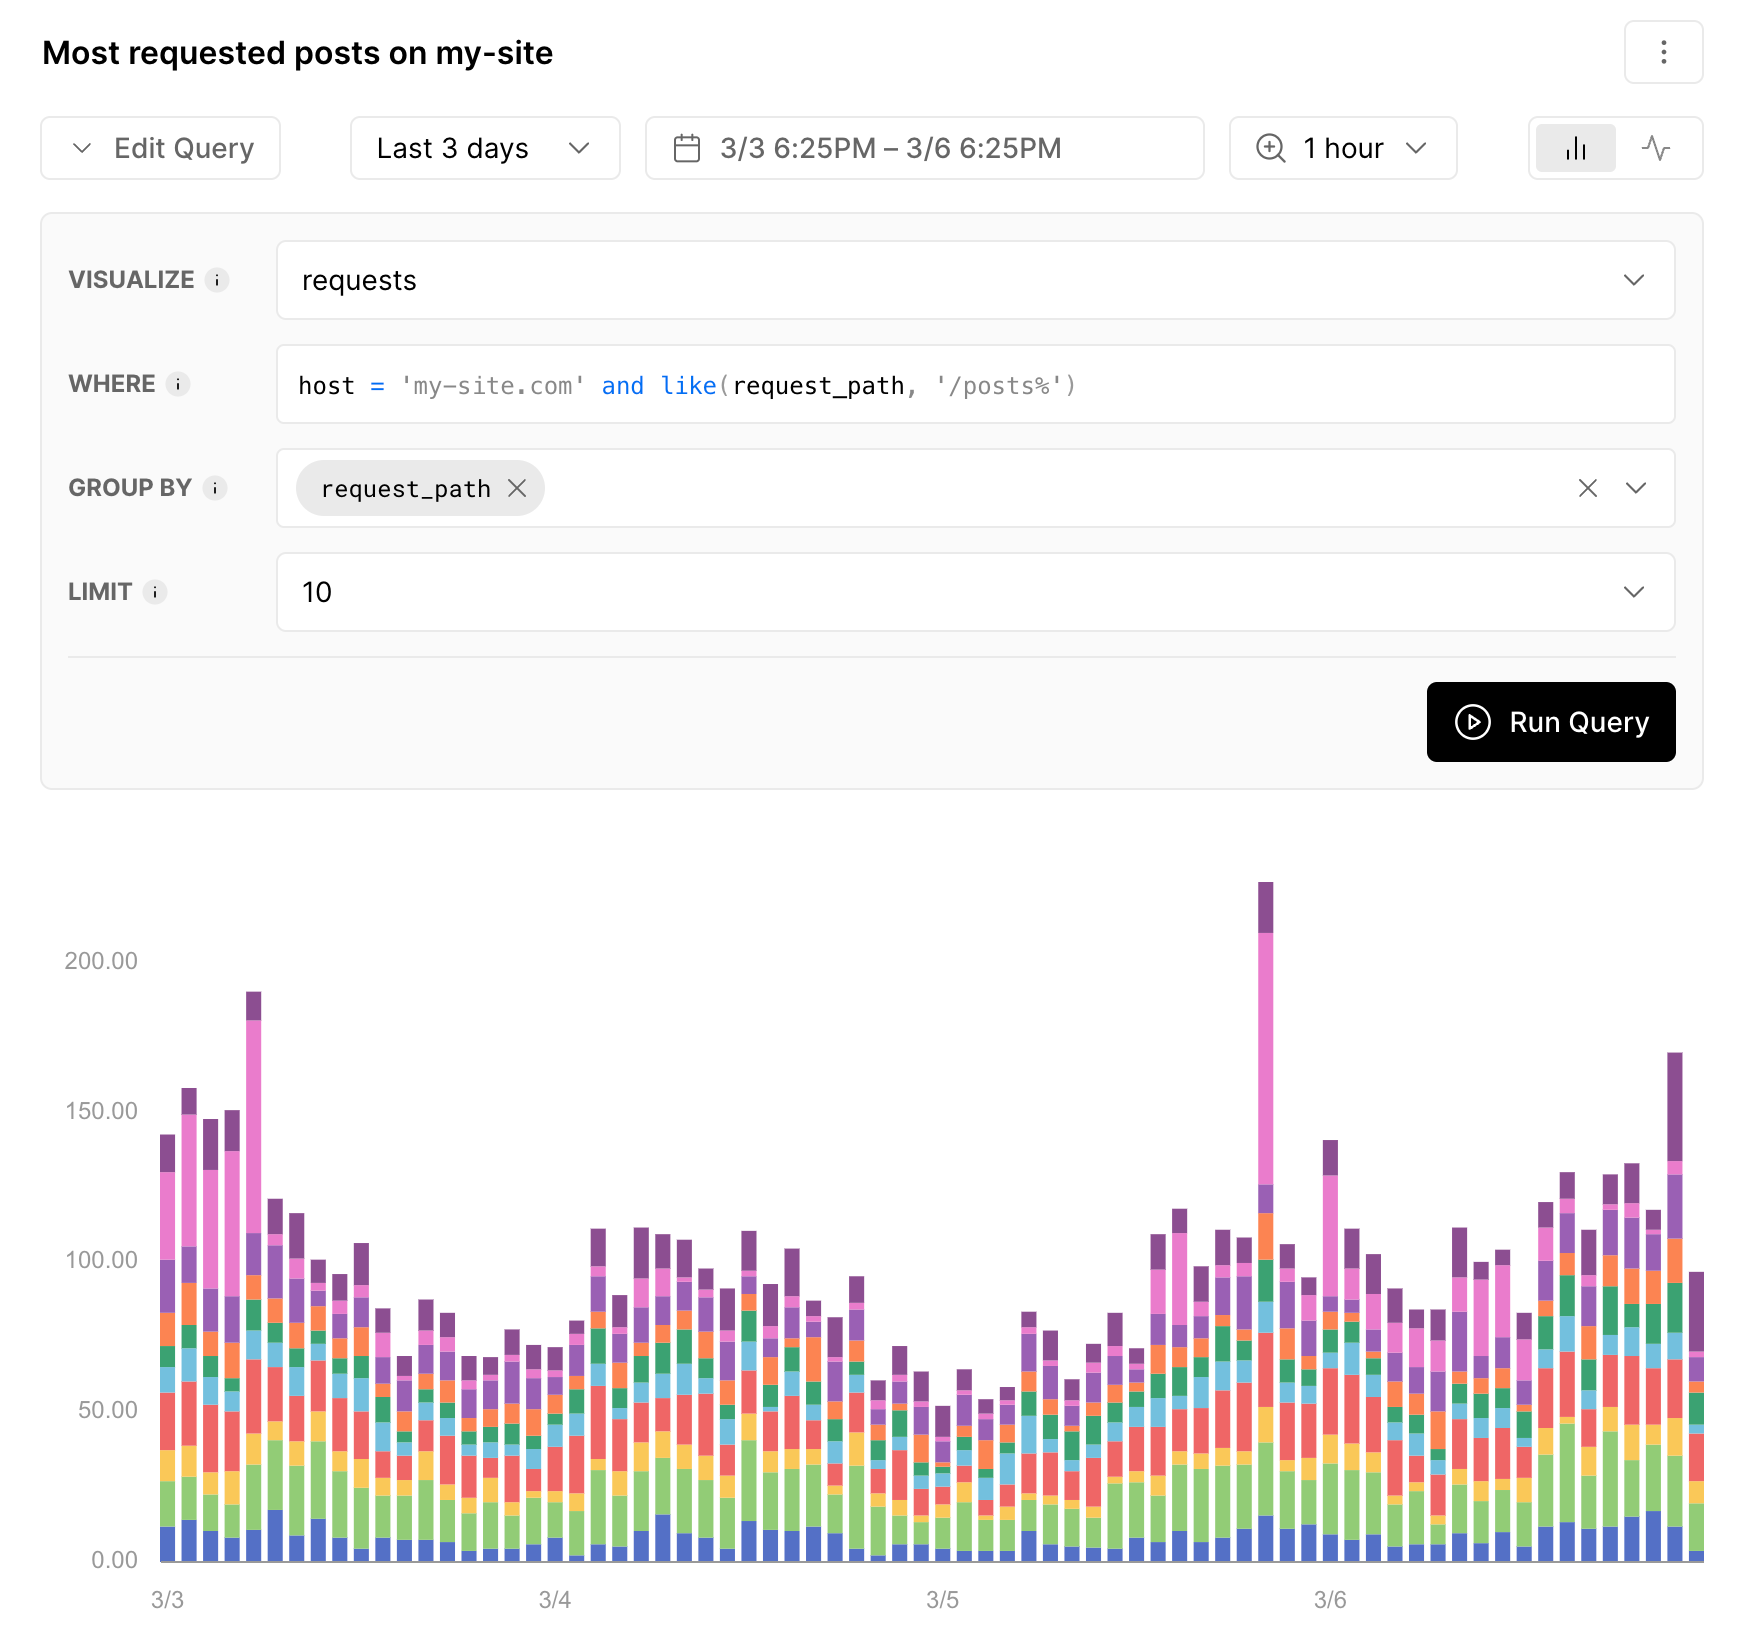 Custom (and saveable) monitoring queries mean you can visualize data from any deployment in all the detail you need.